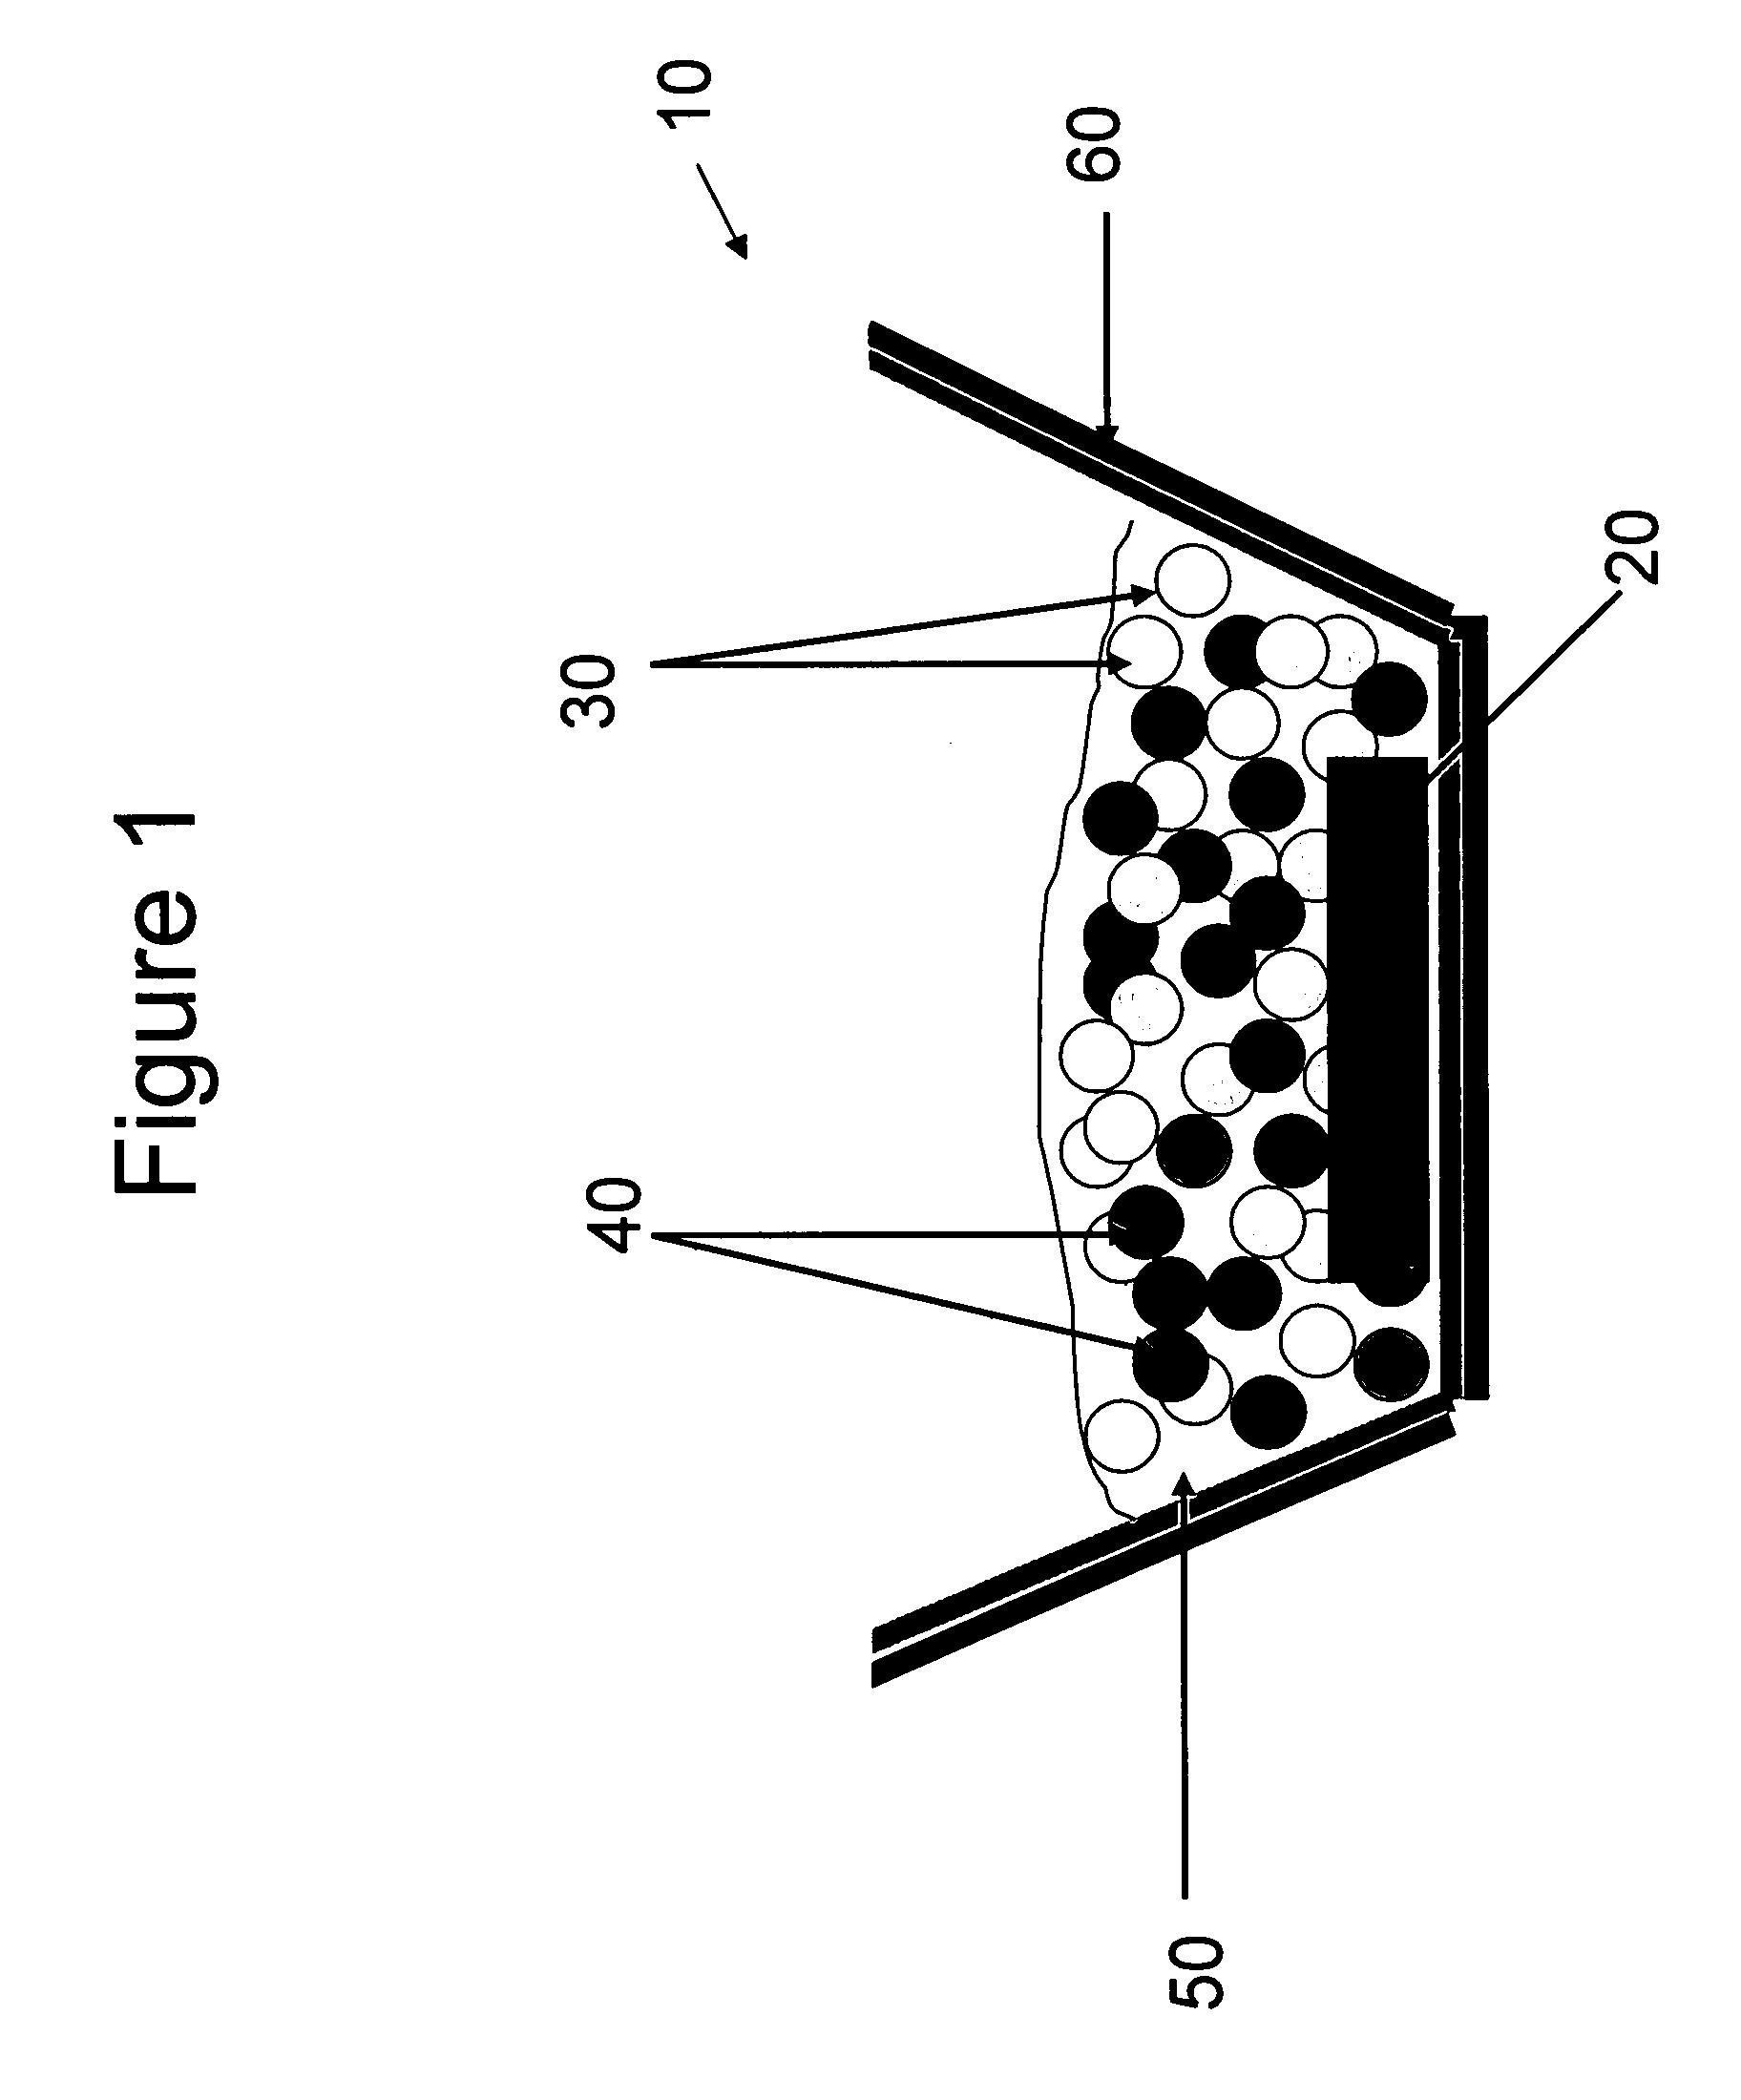 Light emitting diode comprising semiconductor nanocrystal complexes and powdered phosphors